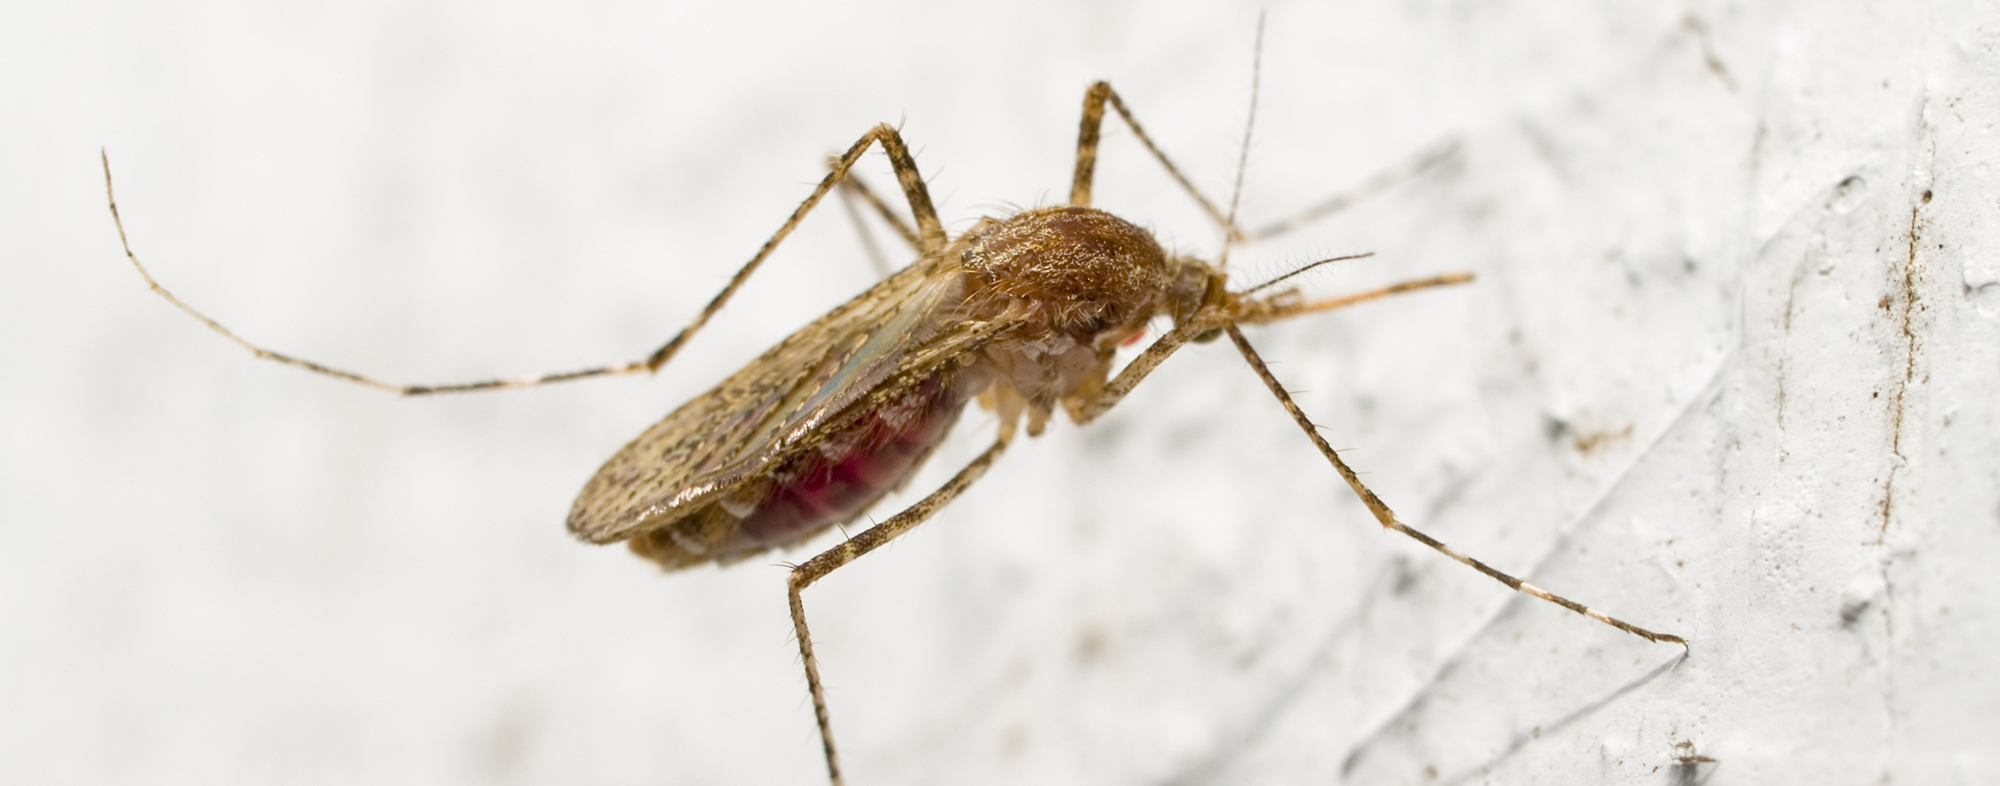 After feeding on blood, a female mosquito lays eggs on a host